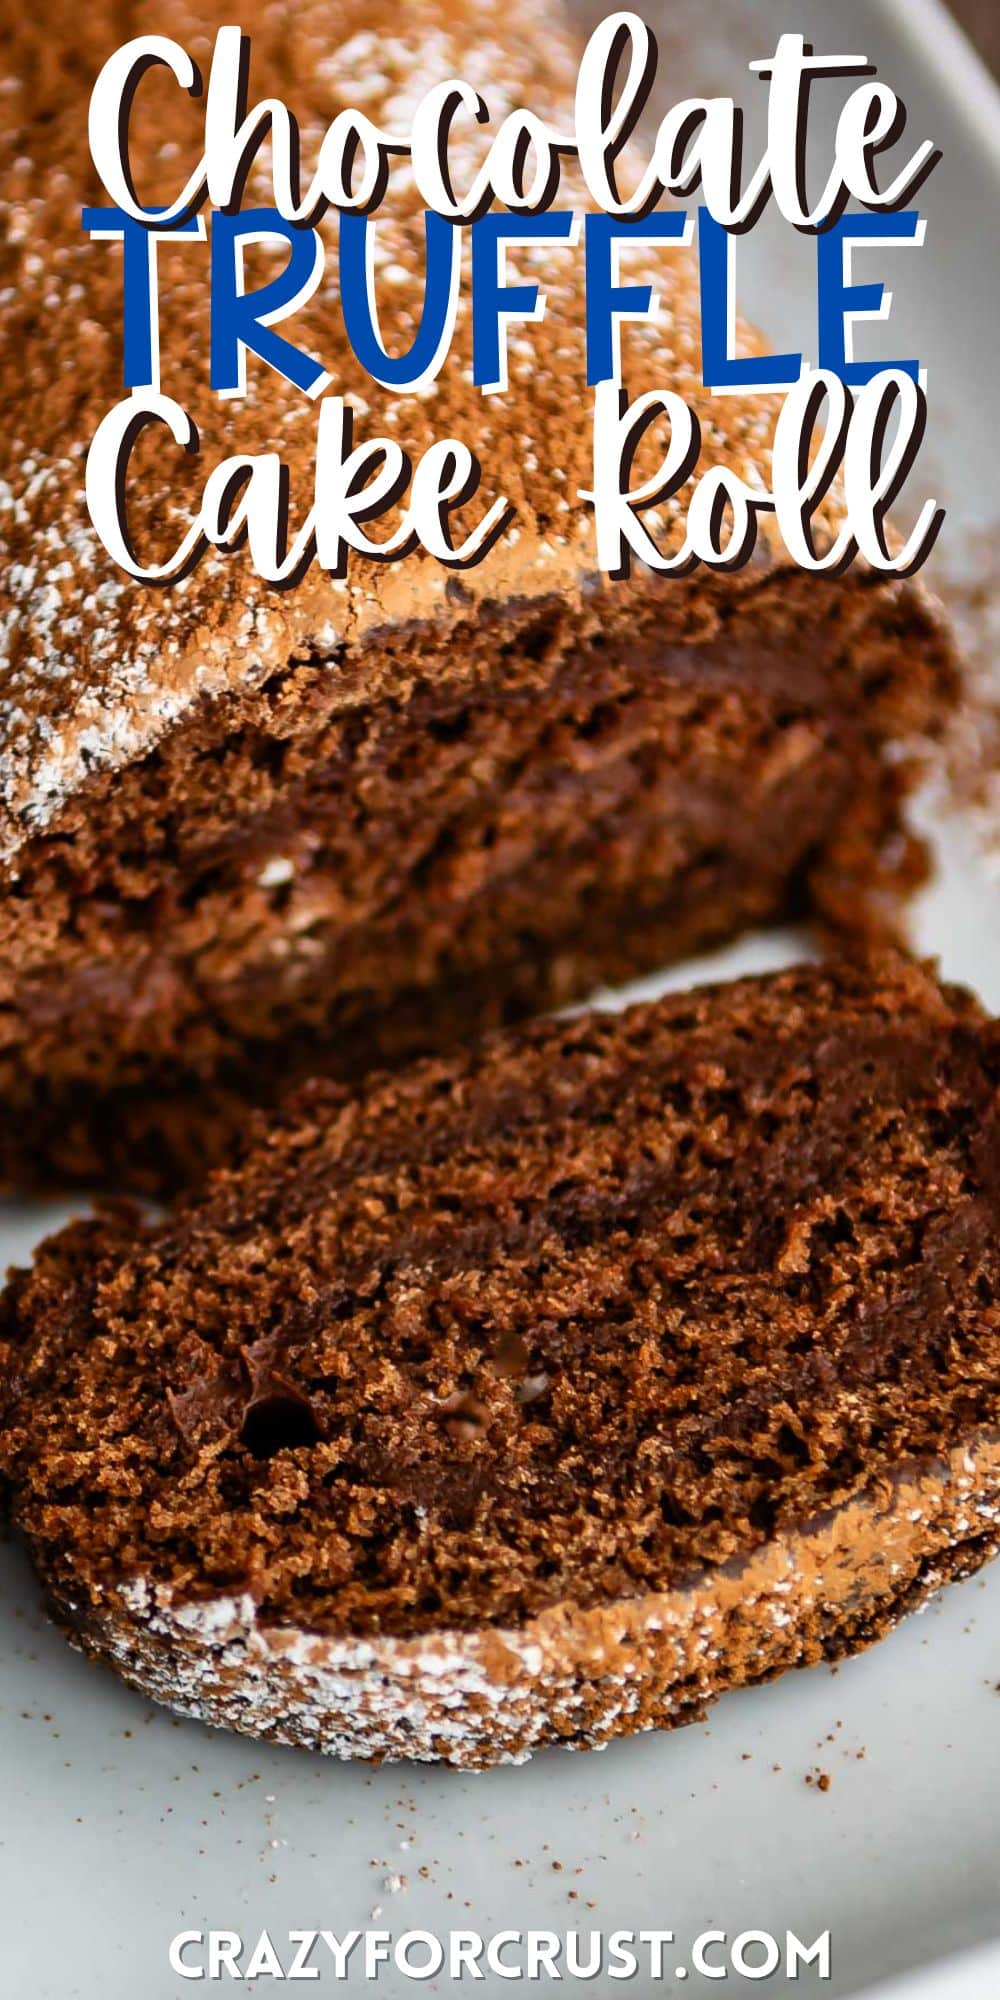 brown cake roll on a white plate with brown and white sugar sprinkled over the top of the roll with words on the image.